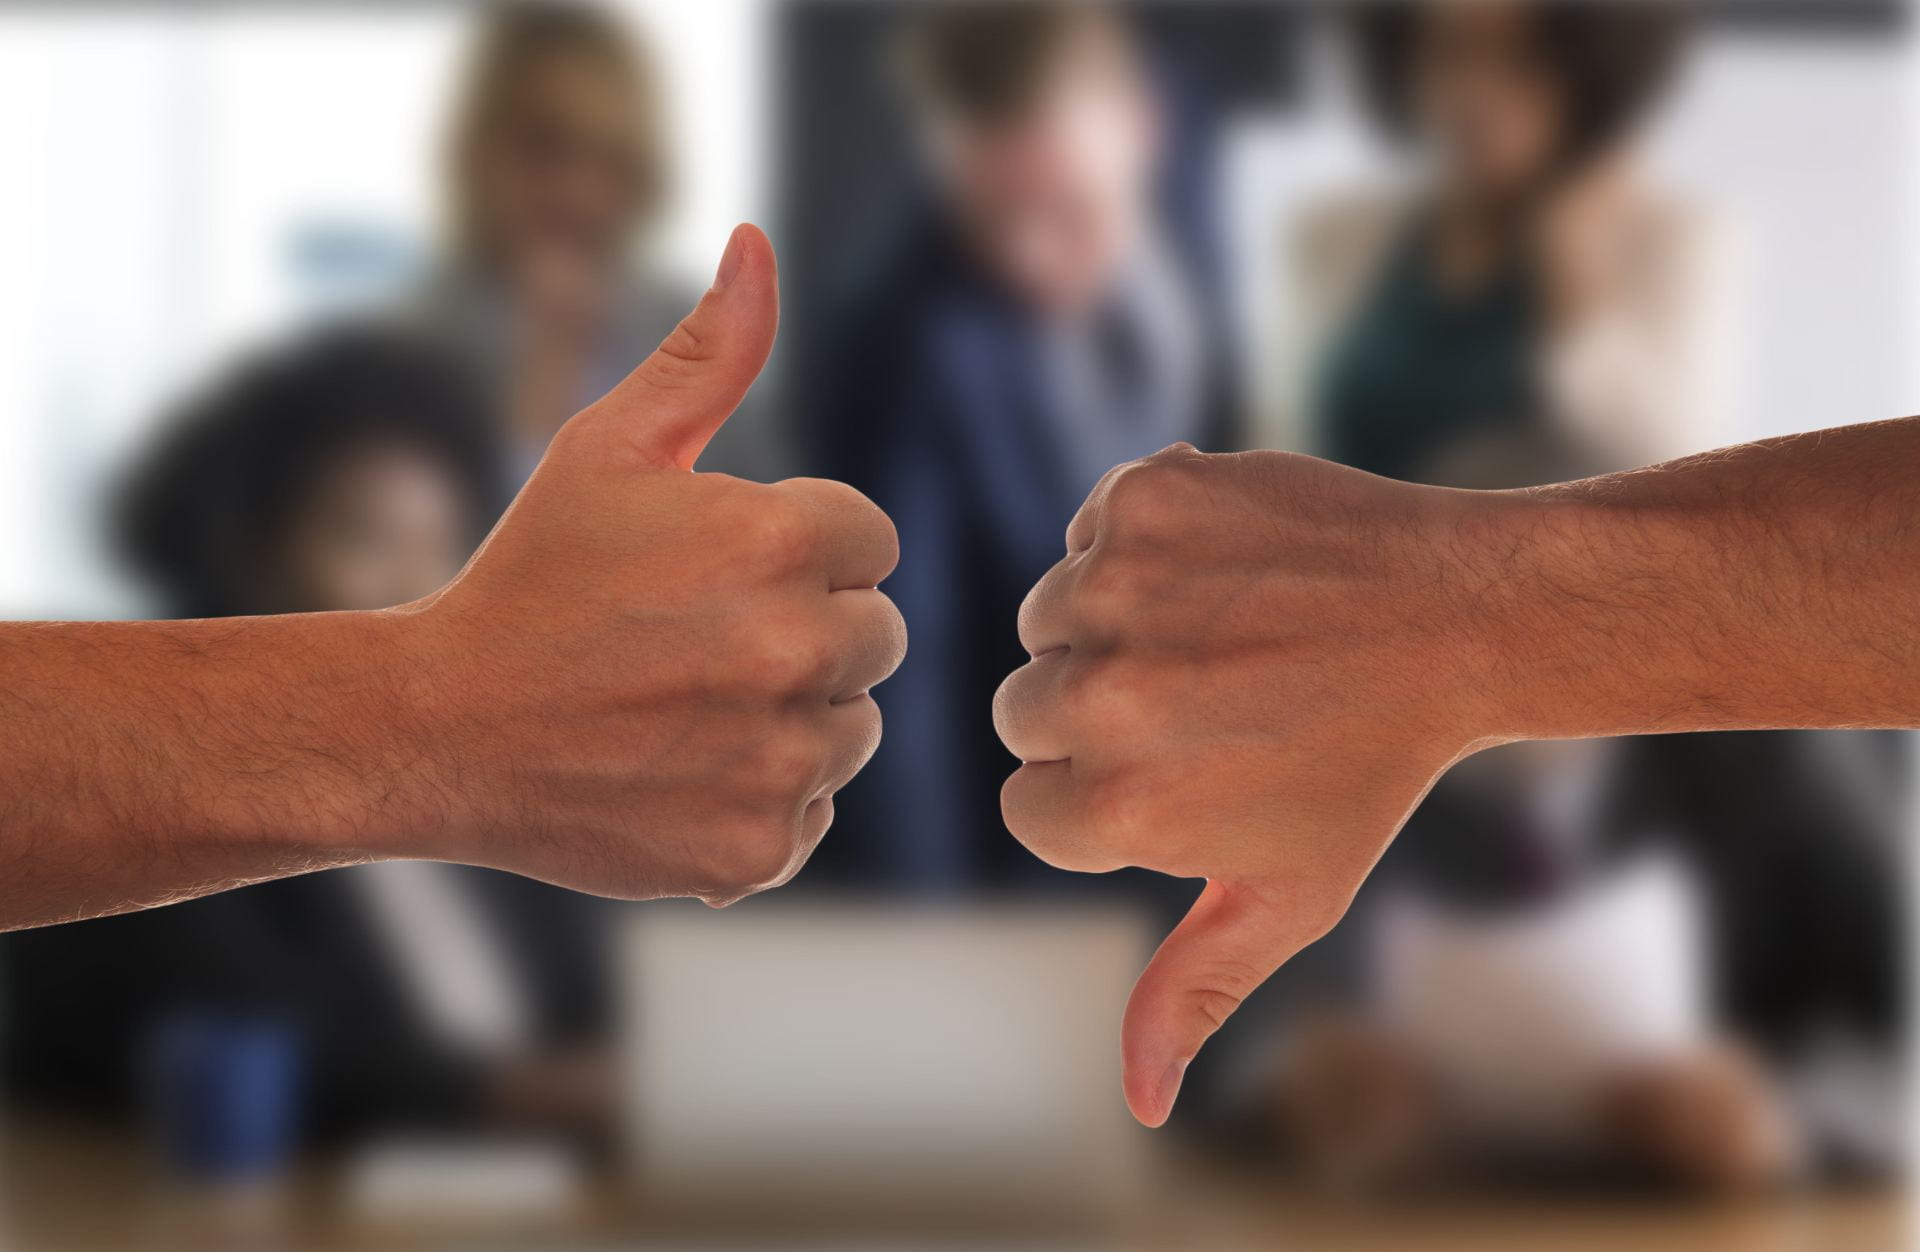 A photo of two hands: one with thumb up, the other with thumb down